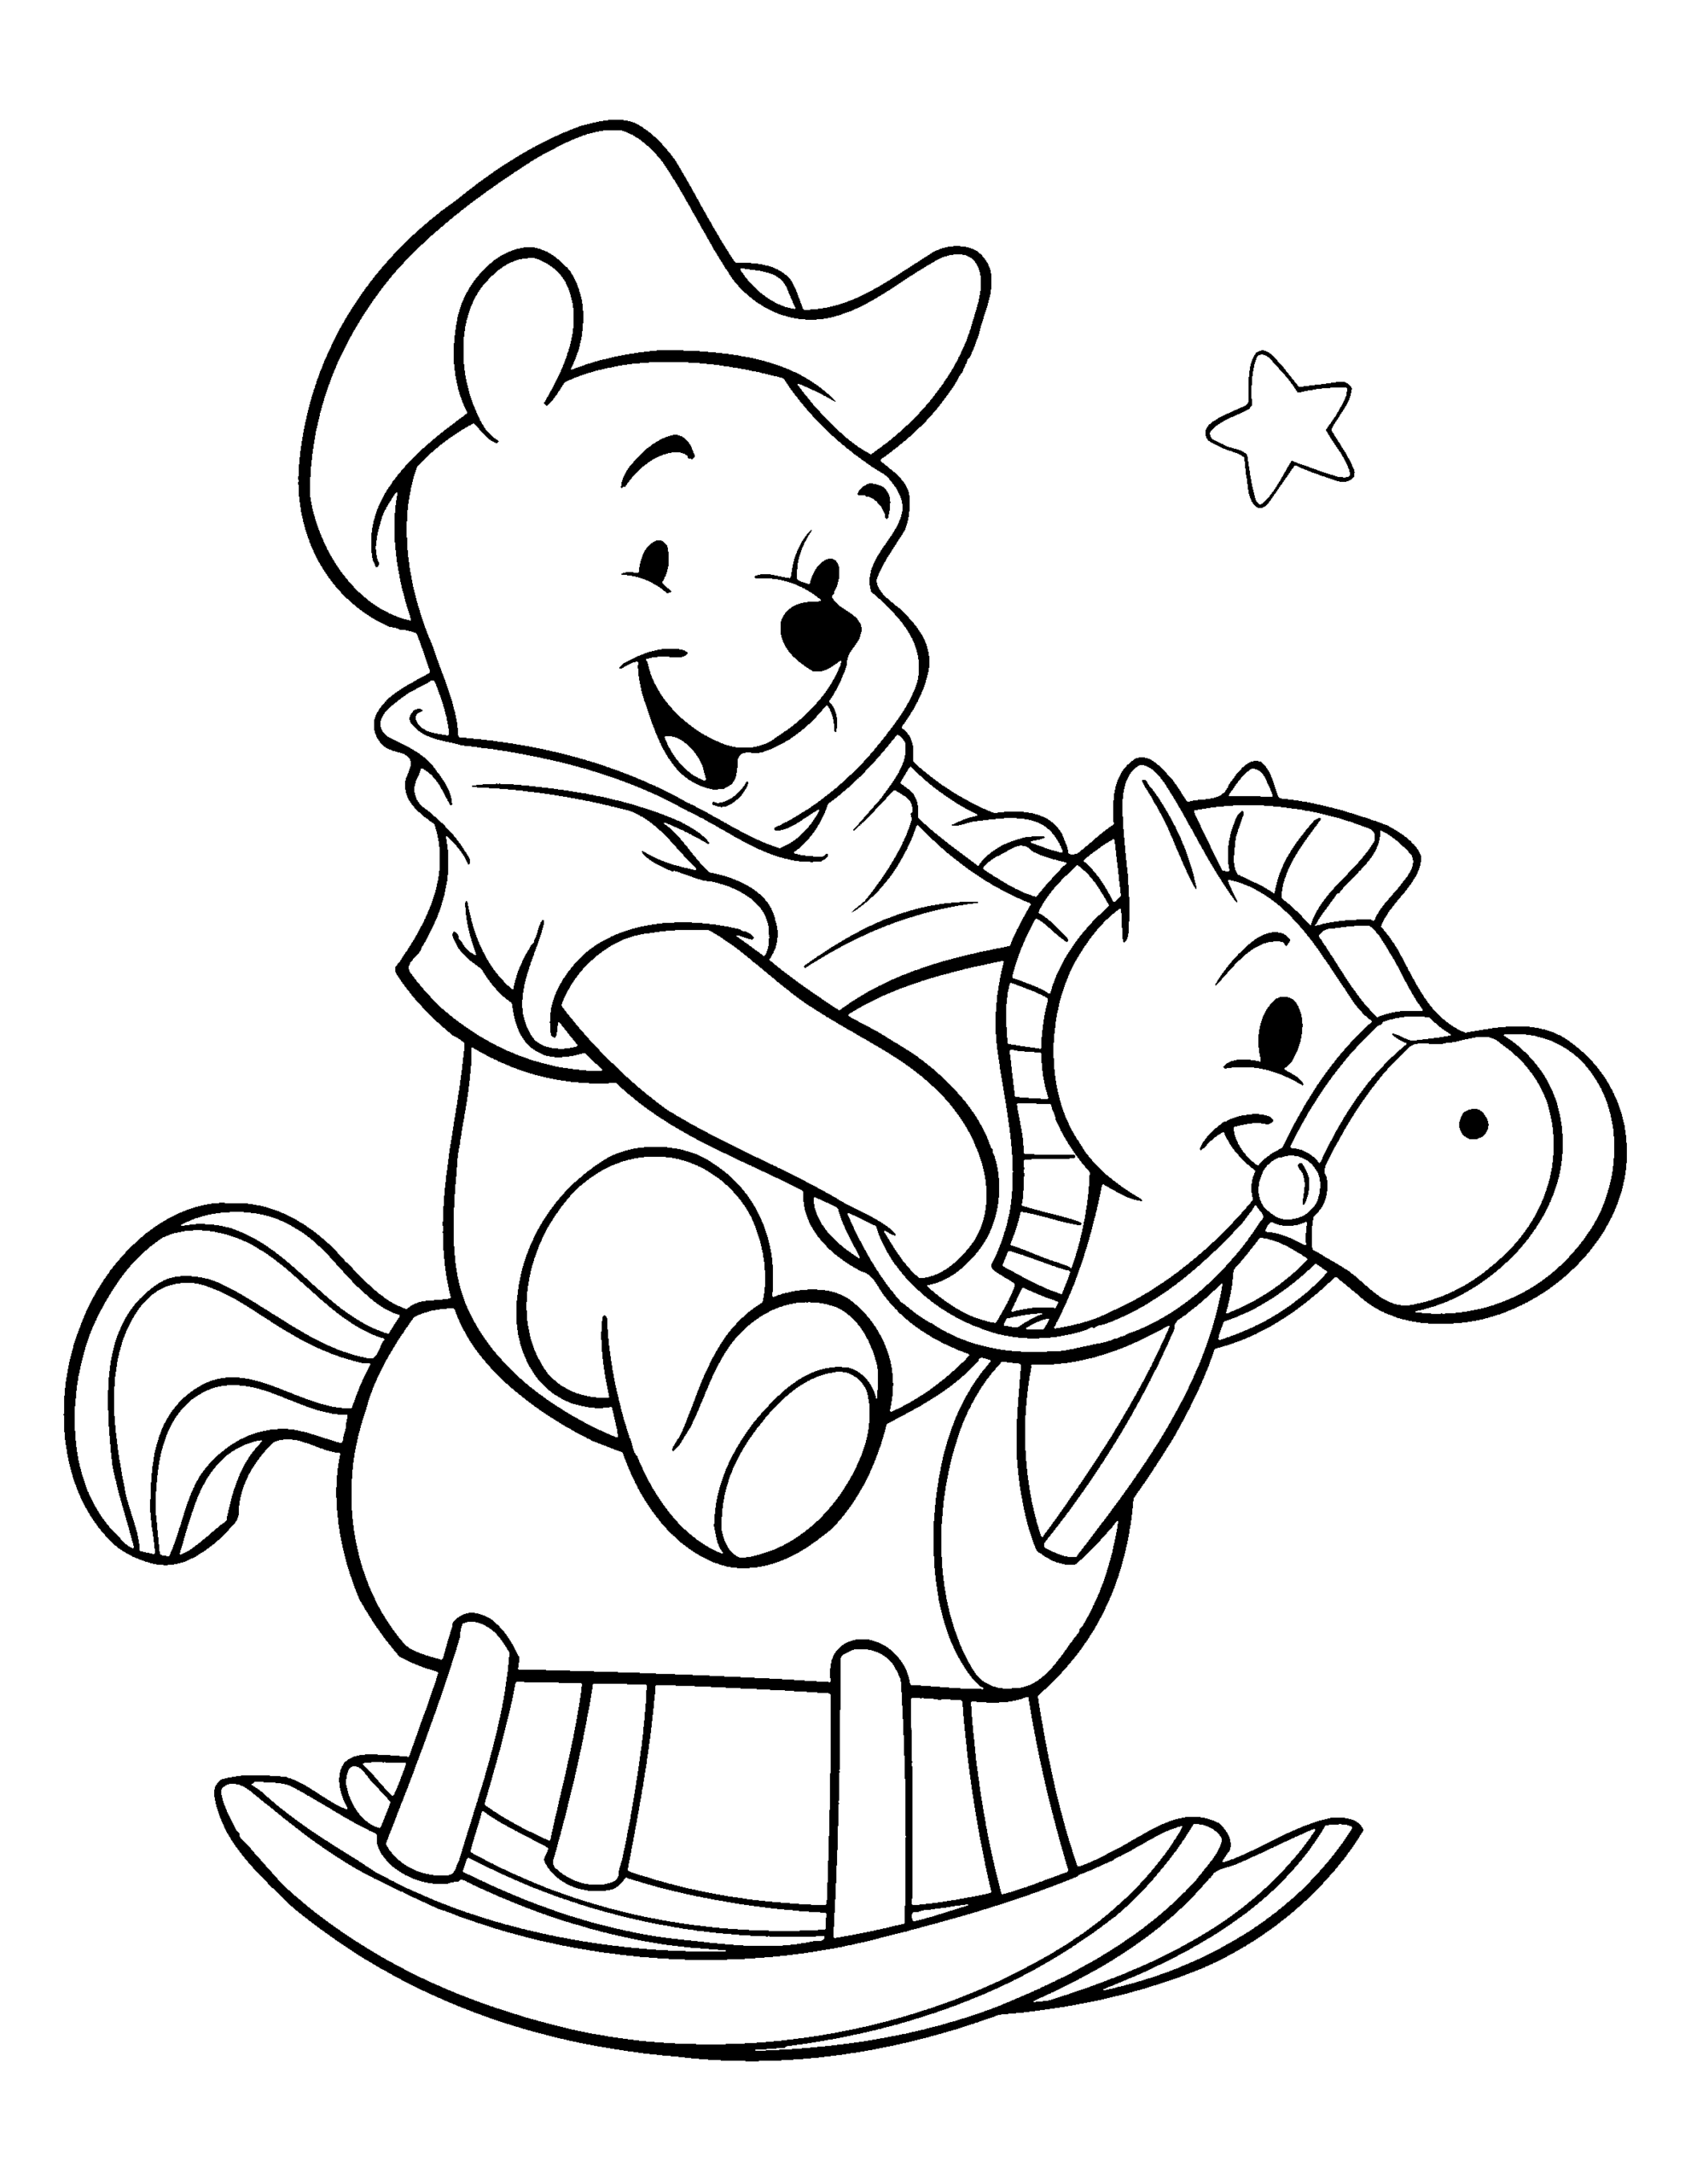 Winnie the Pooh Coloring Pages Cartoons winnie the pooh 107 Printable 2020 7086 Coloring4free